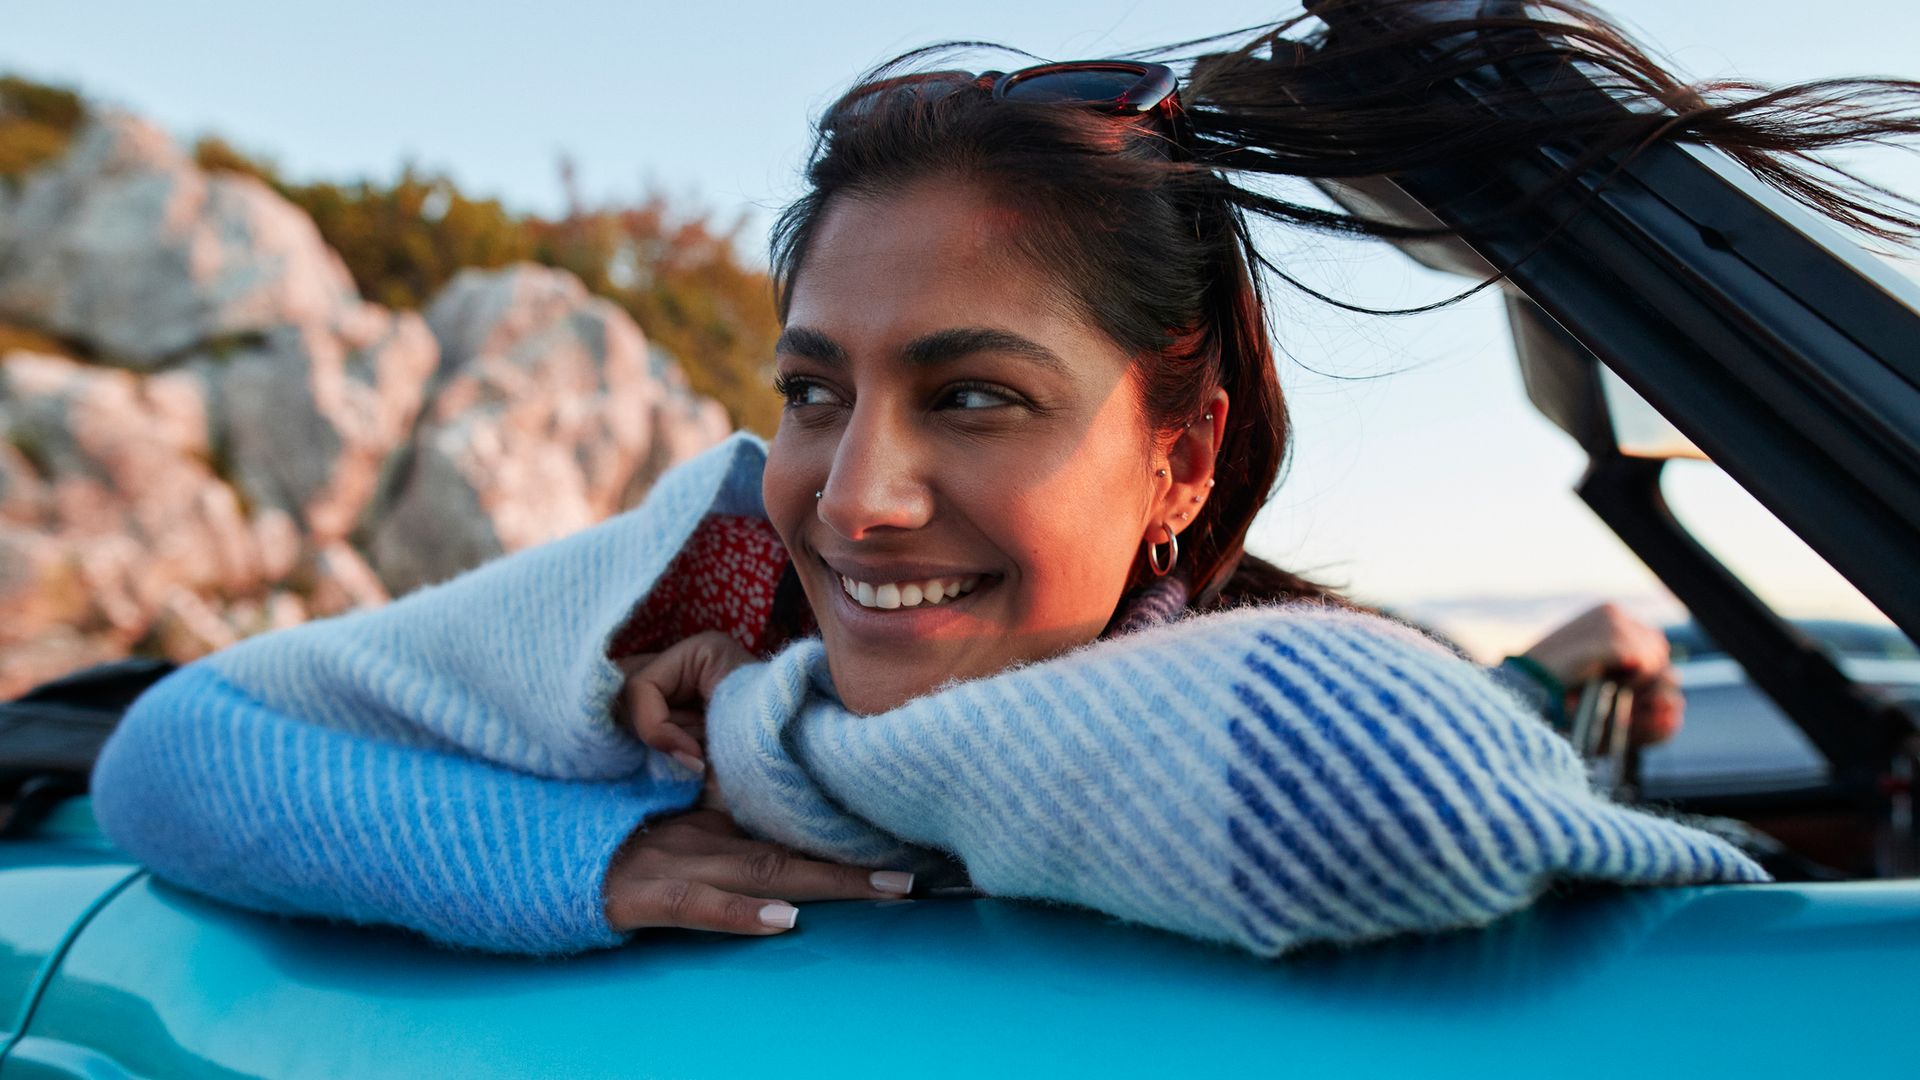 Smiling young woman day dreaming while leaning on convertible car during road trip